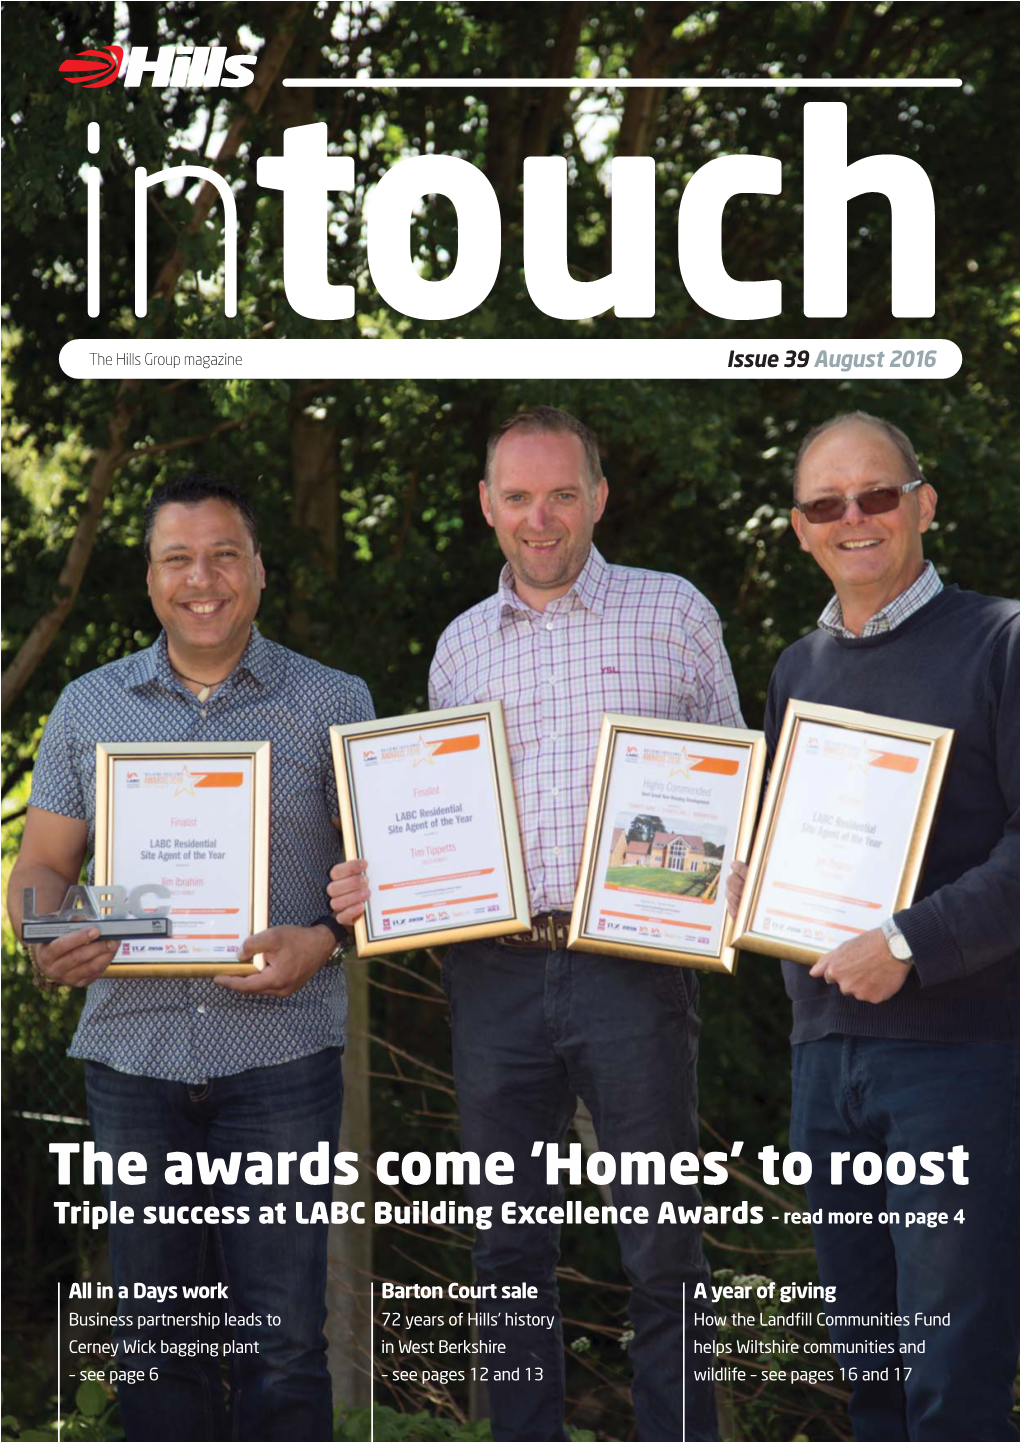 The Awards Come 'Homes' to Roost Triple Success at LABC Building Excellence Awards – Read More on Page 4